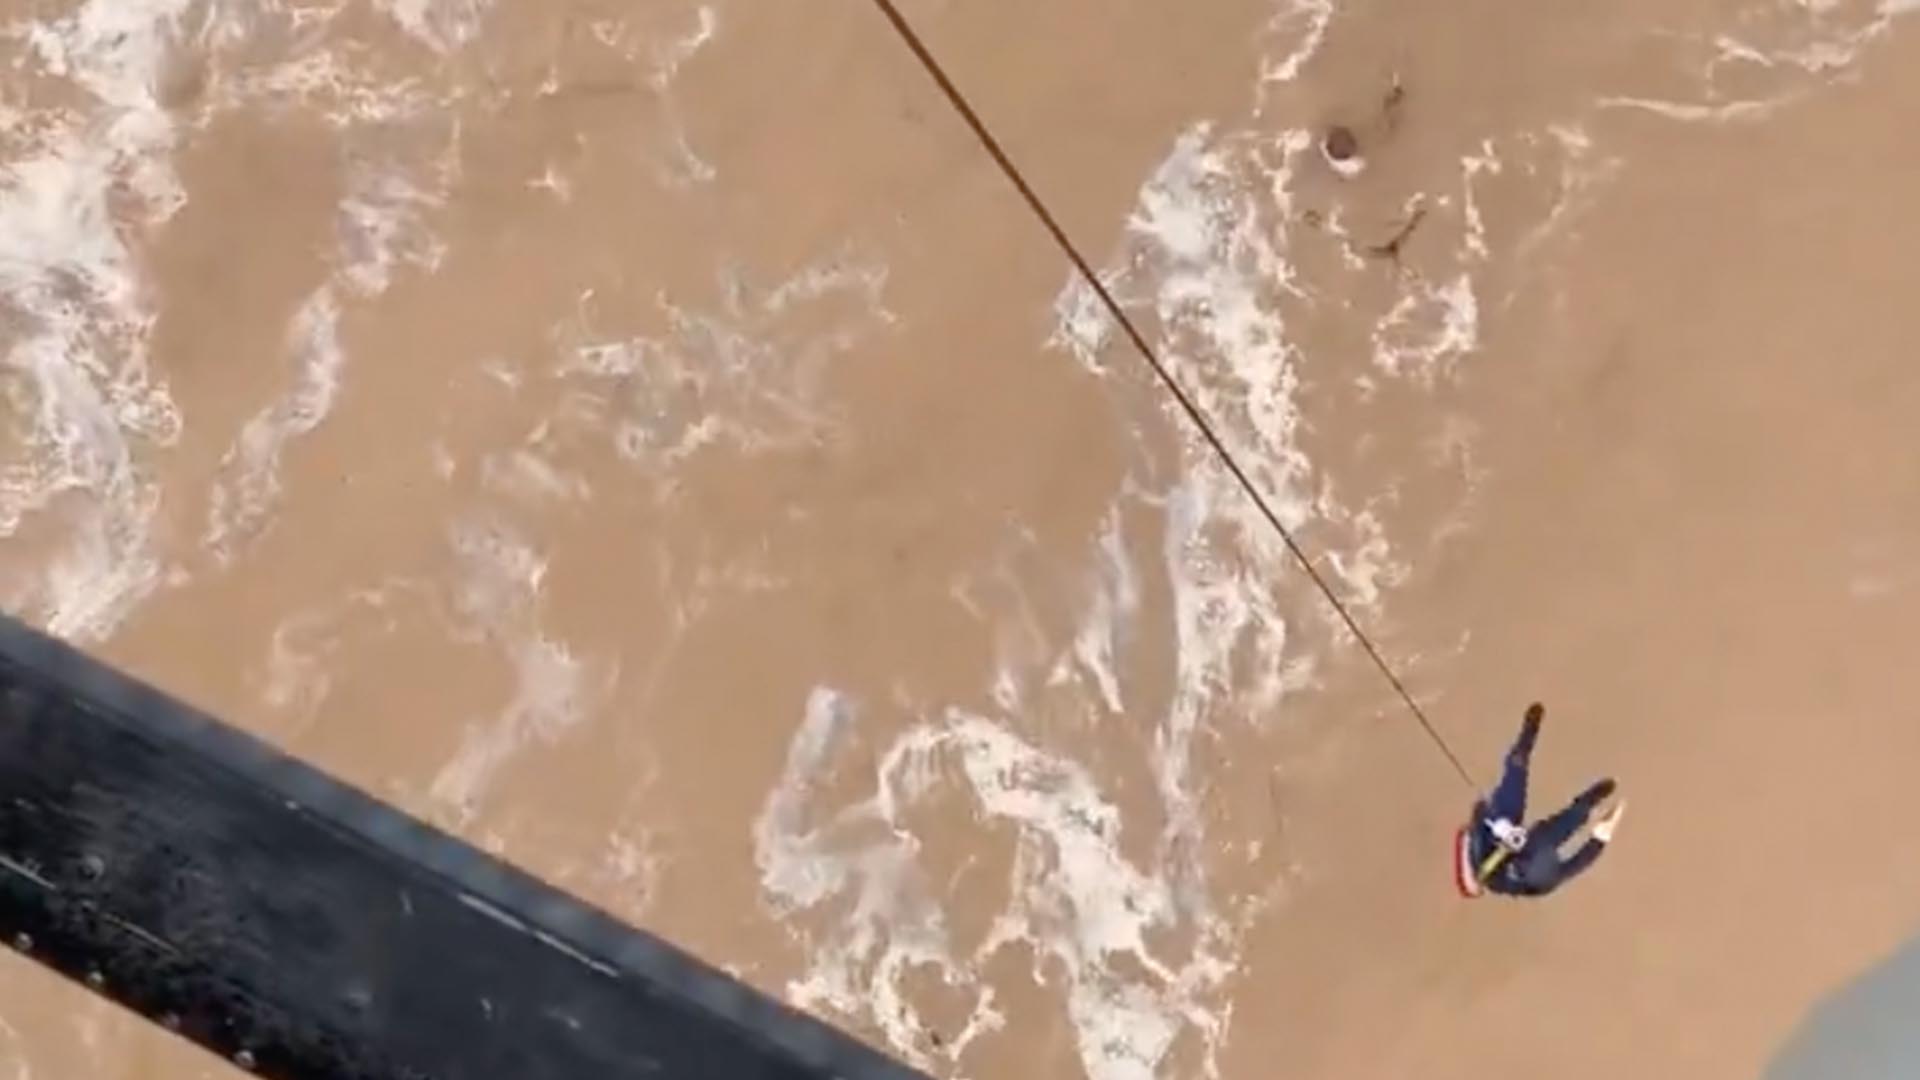 Aerial rescues in Oman save dozens from flash floods | Floods [Video]